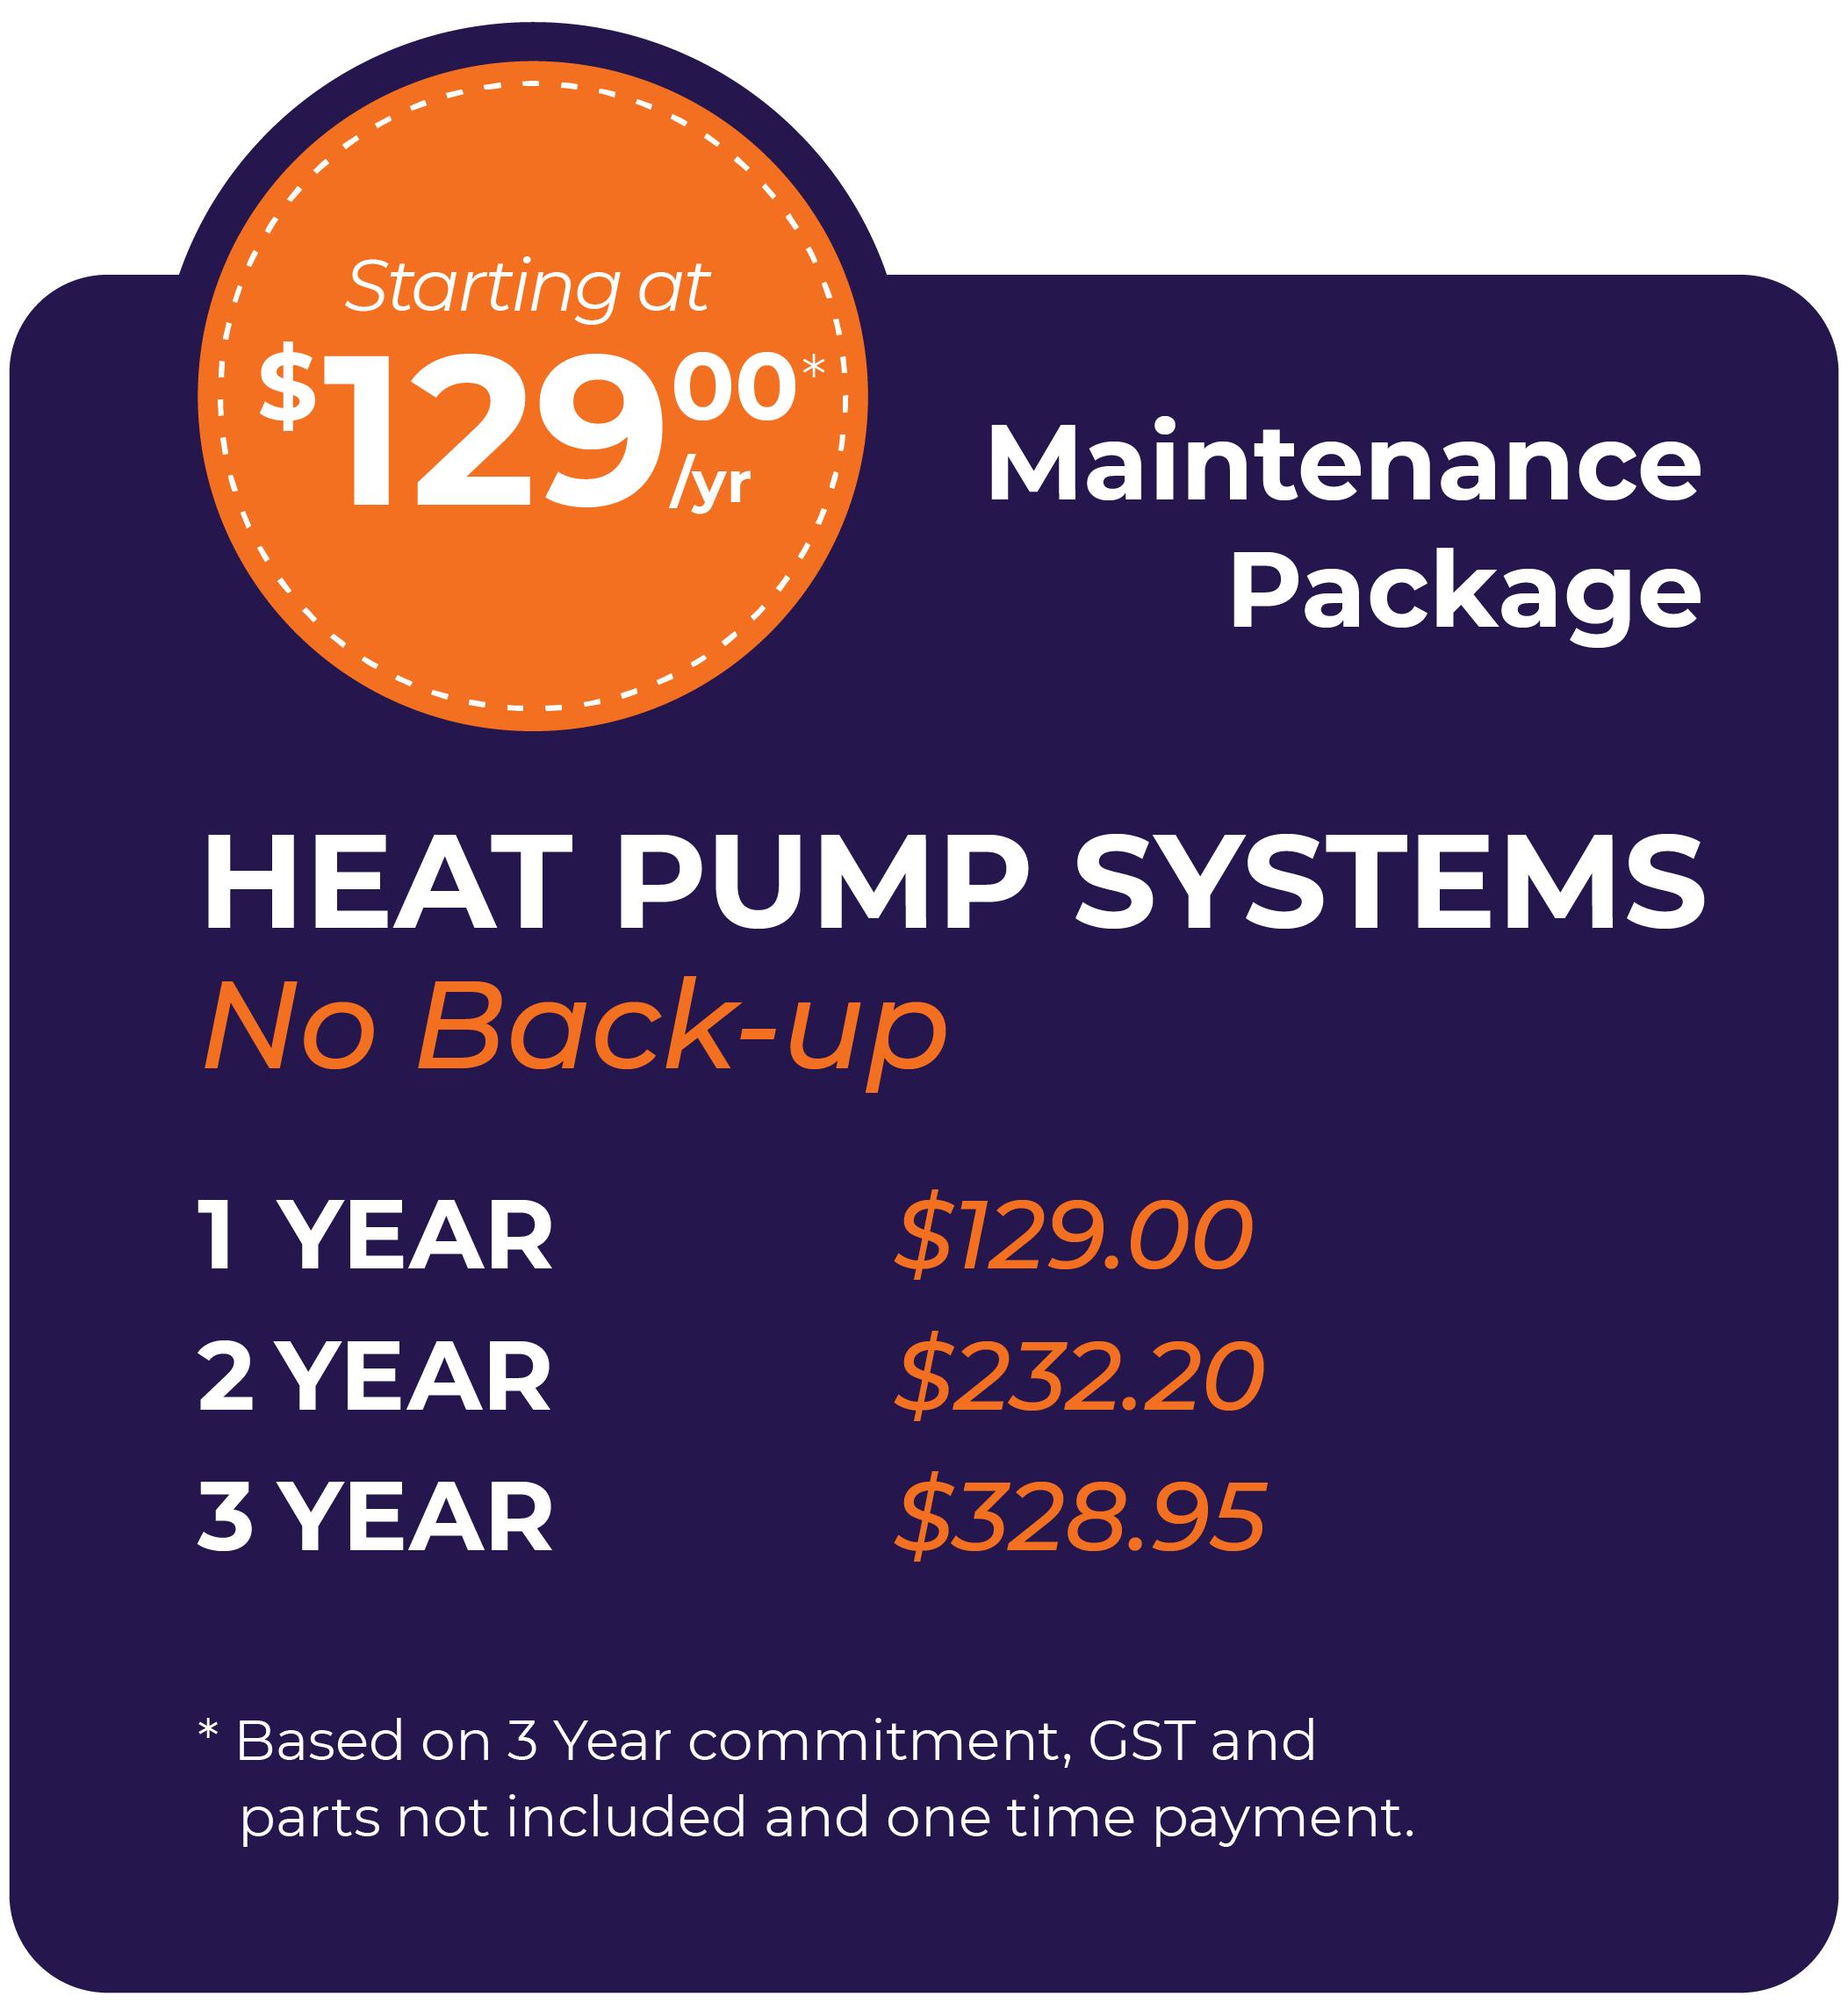 Heat Pump Systems with No Back Up Maintenance